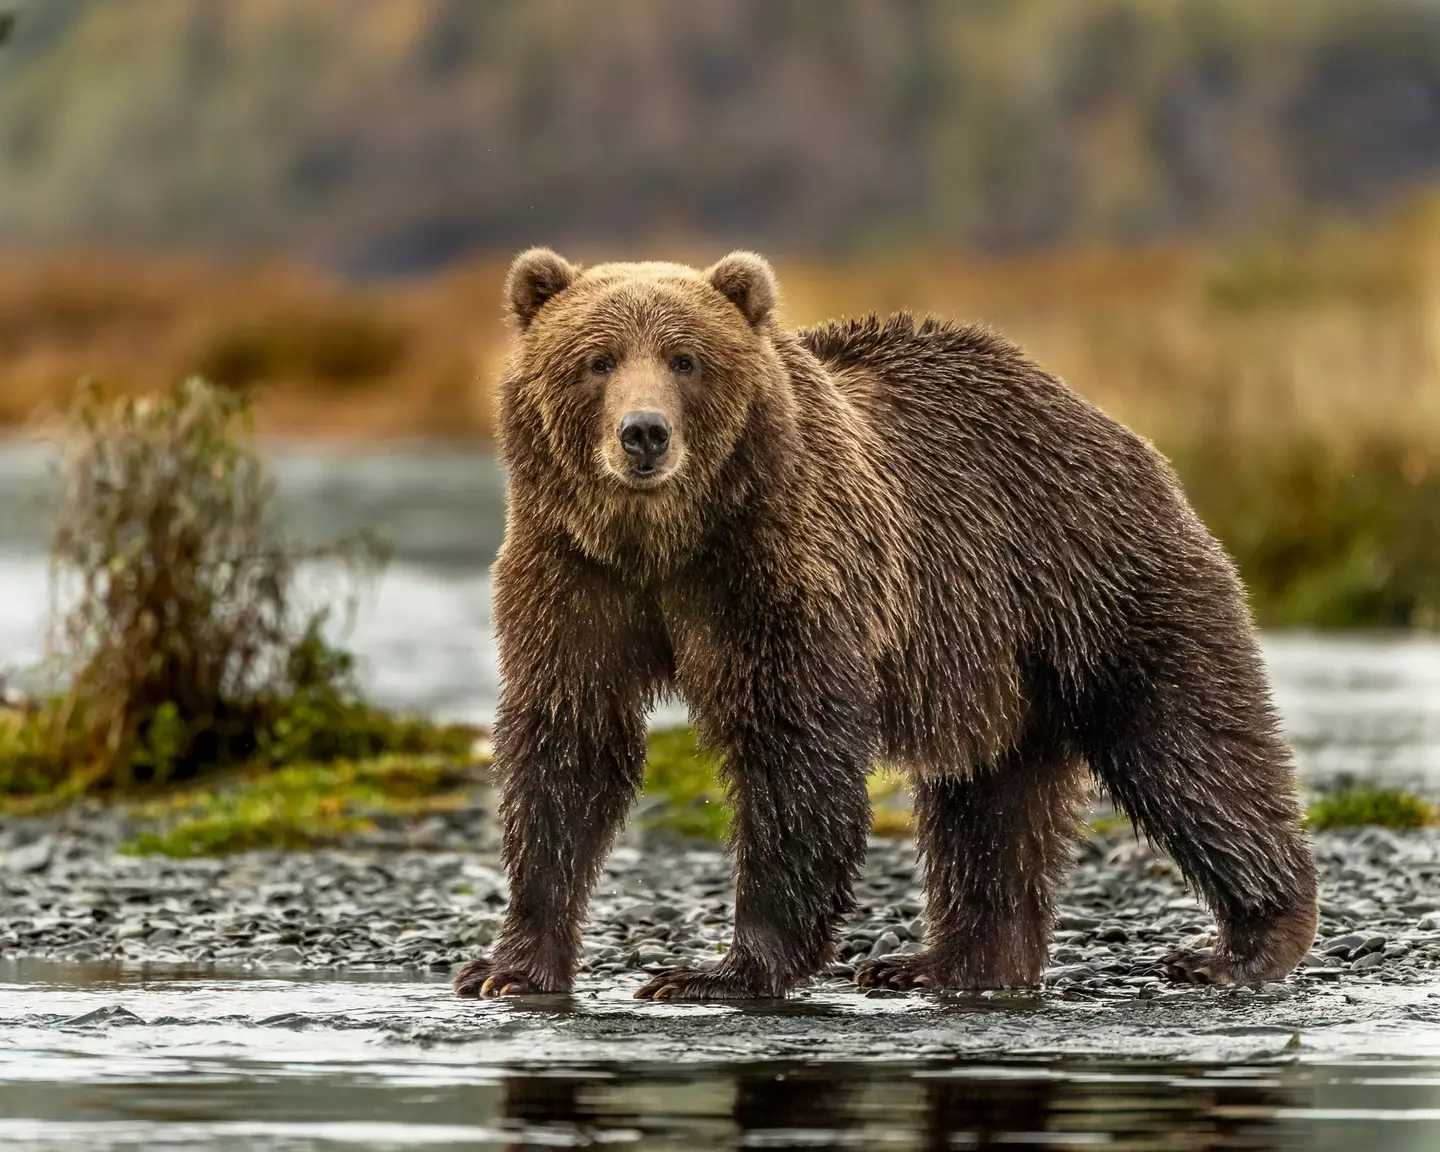 A bear killed both Treadwell and his girlfriend Annie. (Getty stock image)